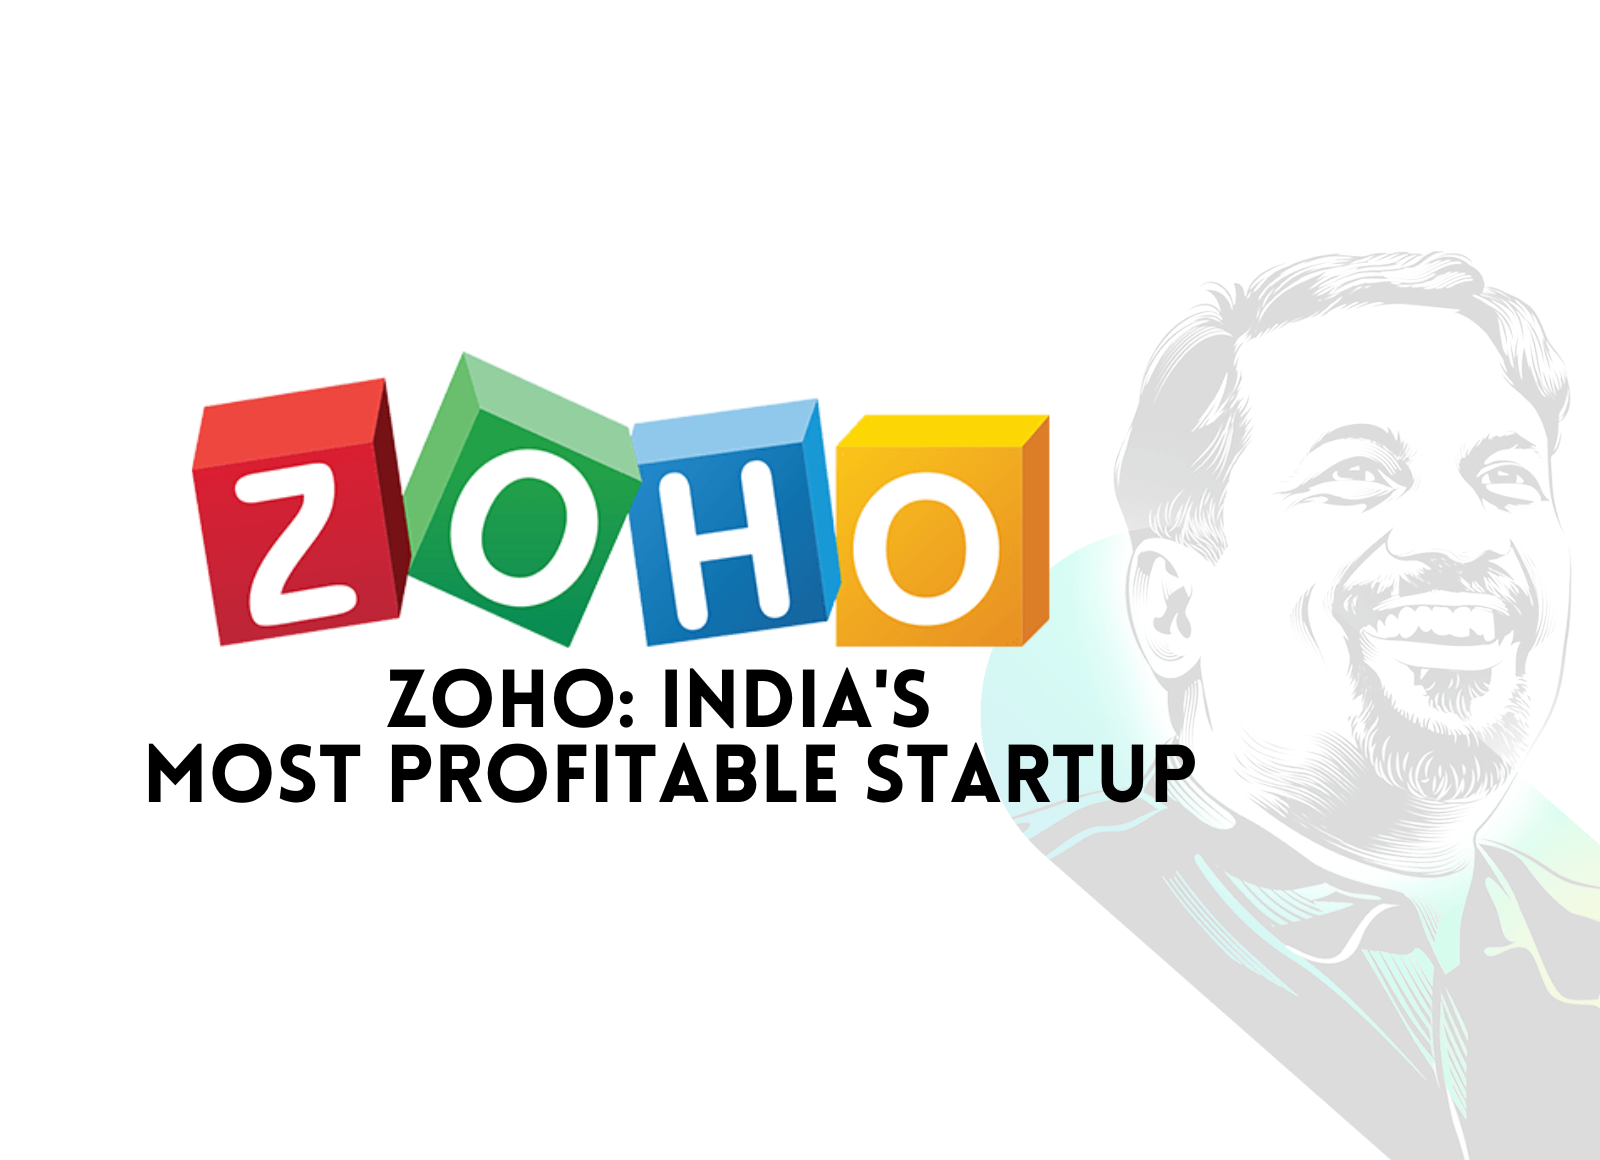 Zoho Corporation, a software development company, is a remarkable case study in the tech world. It is a great example of a company that has achieved tremendous success without any external funding. In 2020, Zoho reported a profit of Rs 2750 crore. This incredible achievement is a testament to the company's unique business model and its unwavering commitment to providing high-quality software products to its customers.  Zoho Corporation was founded in 1996 by Sridhar Vembu in Chennai, India. It started as AdventNet Inc., a company that developed network management software. Over time, Zoho expanded its product offerings to include a suite of cloud-based software applications for businesses. These applications cover a range of business needs, including finance, marketing, sales, and project management.  One of the reasons Zoho has been so successful is its business model. The company operates on a subscription-based model, which means that customers pay a monthly or annual fee for access to Zoho's software applications. This model allows the company to generate a stable and predictable stream of revenue, which in turn, allows Zoho to reinvest in its products and improve its services.  Another factor that sets Zoho apart is its dedication to providing high-quality software products. The company has a strong focus on research and development and has a team of over 8,000 employees working to improve its software offerings.   Zoho's commitment to quality has earned it a loyal customer base that values the reliability and functionality of its products. Zoho's success without external funding is also a testament to the company's ability to control its costs. By avoiding the high costs associated with raising capital, Zoho has been able to keep its expenses low and reinvest profits back into the company. This has allowed Zoho to grow at a steady pace without being beholden to external investors.  Zoho's journey to success has not been without its challenges. The company has had to compete against large, well-funded competitors in the software industry. However, Zoho has managed to  differentiate itself by offering a unique suite of products and a commitment to customer service that is unmatched in the industry.  In conclusion, Zoho Corporation is a remarkable case study in the tech world. It is a testament to the fact that it is possible to achieve great success without external funding. By offering high-quality software products on a subscription-based model, controlling costs, and focusing on research and development, Zoho has built a successful and sustainable business that has earned it a loyal customer base. Its success without external funding is an inspiration to entrepreneurs and businesses around the world.